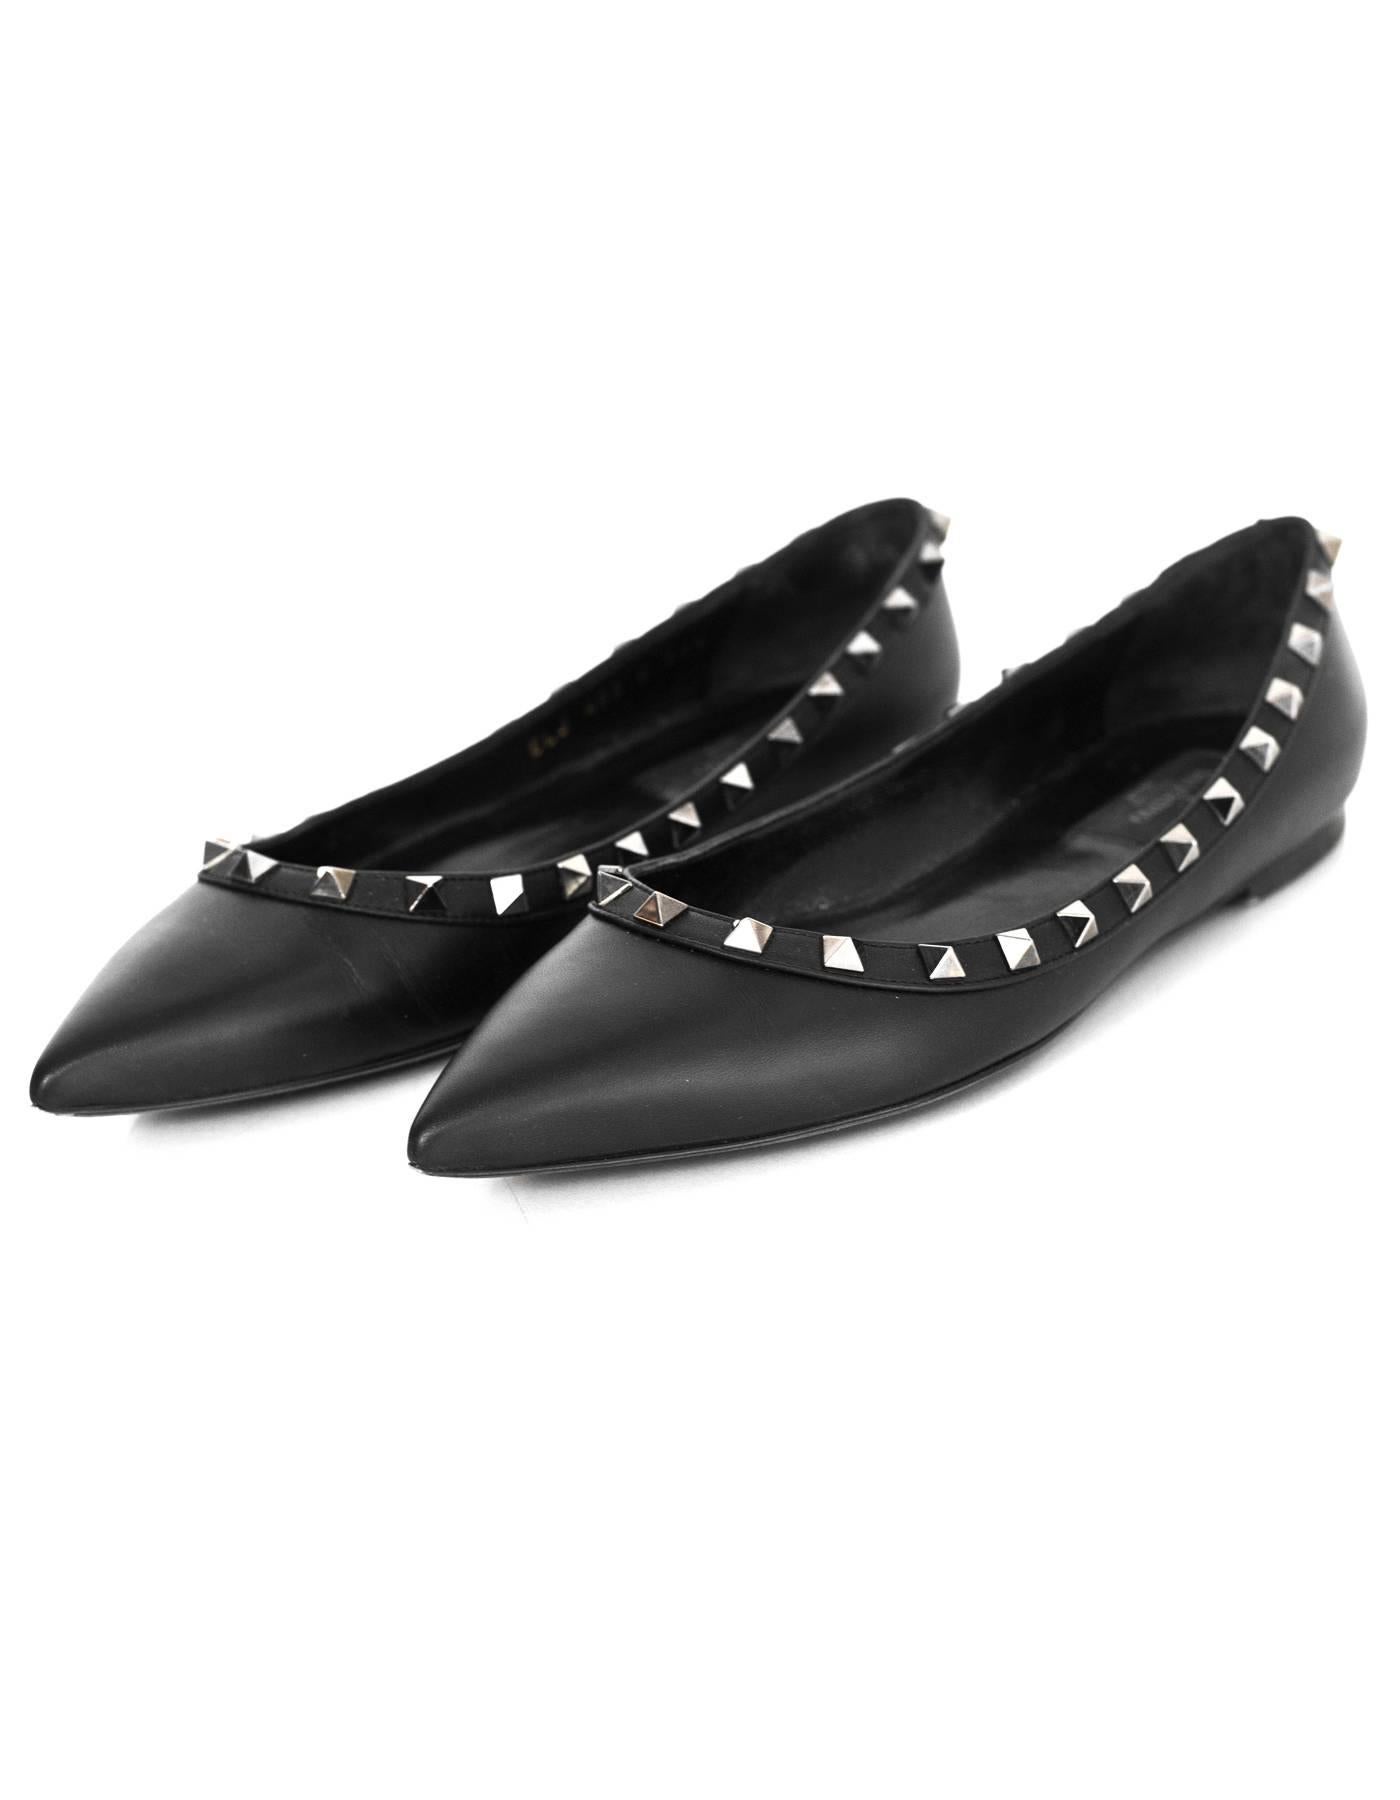 Valentino Noir Rockstud Flats Sz 37.5

Made In: Italy
Color: Black
Retail Price: $775 + tax
Materials: Leather, metal
Closure/Opening: Slide on
Sole Stamp: Valentino Garavani Made in Italy 37.5
Overall Condition: Excellent pre-owned condition with